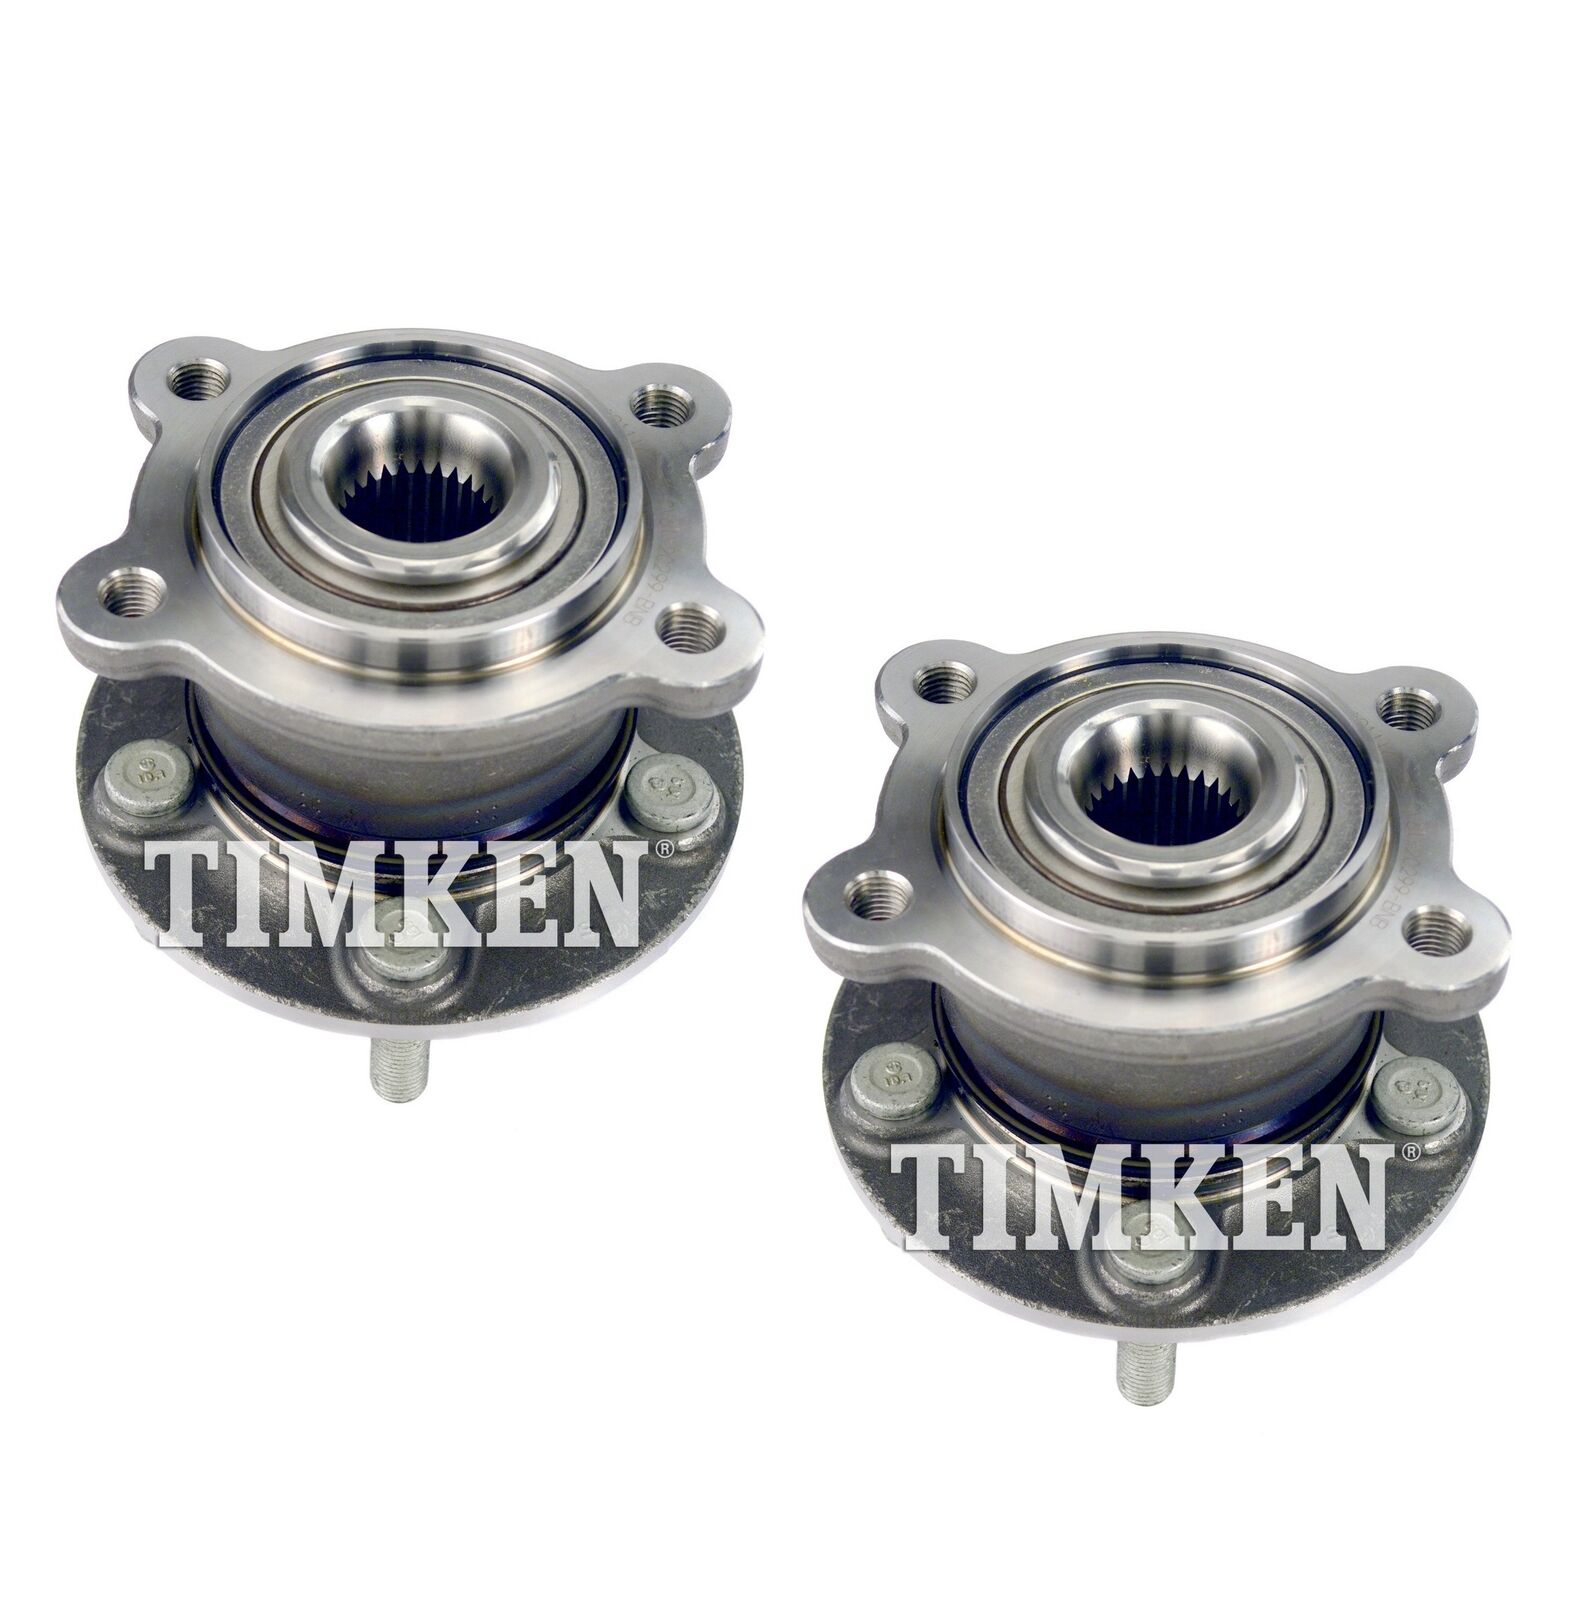 Pair Set of 2 Rear Timken Wheel Bearing Hub Kit for Ford Escape Lincoln MKC AWD